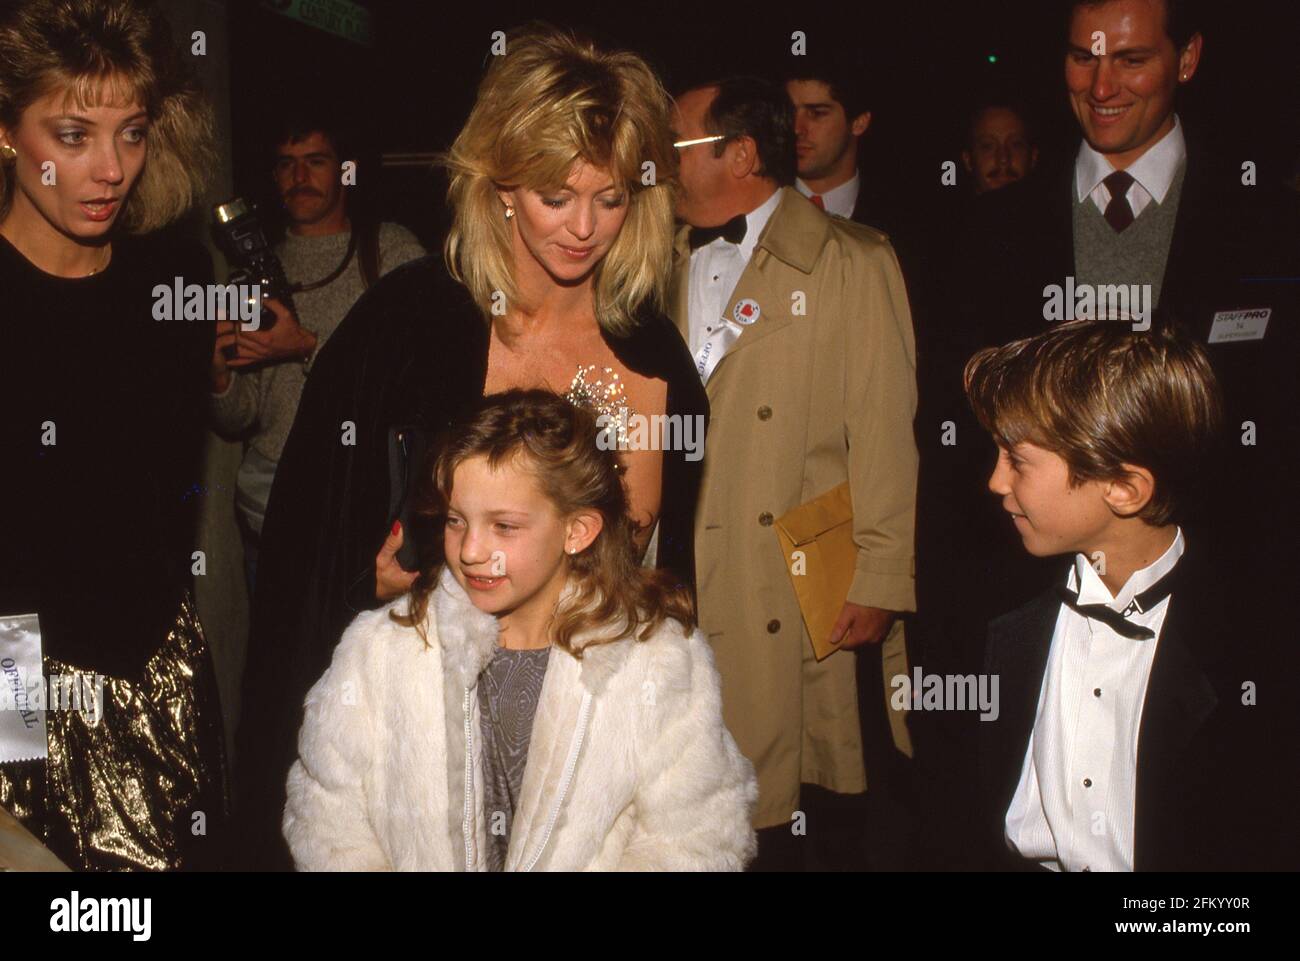 Goldie Hawn With Kate Hudson And Oliver Hudson Circa 1980s Credit Ralph Dominguezmediapunch 